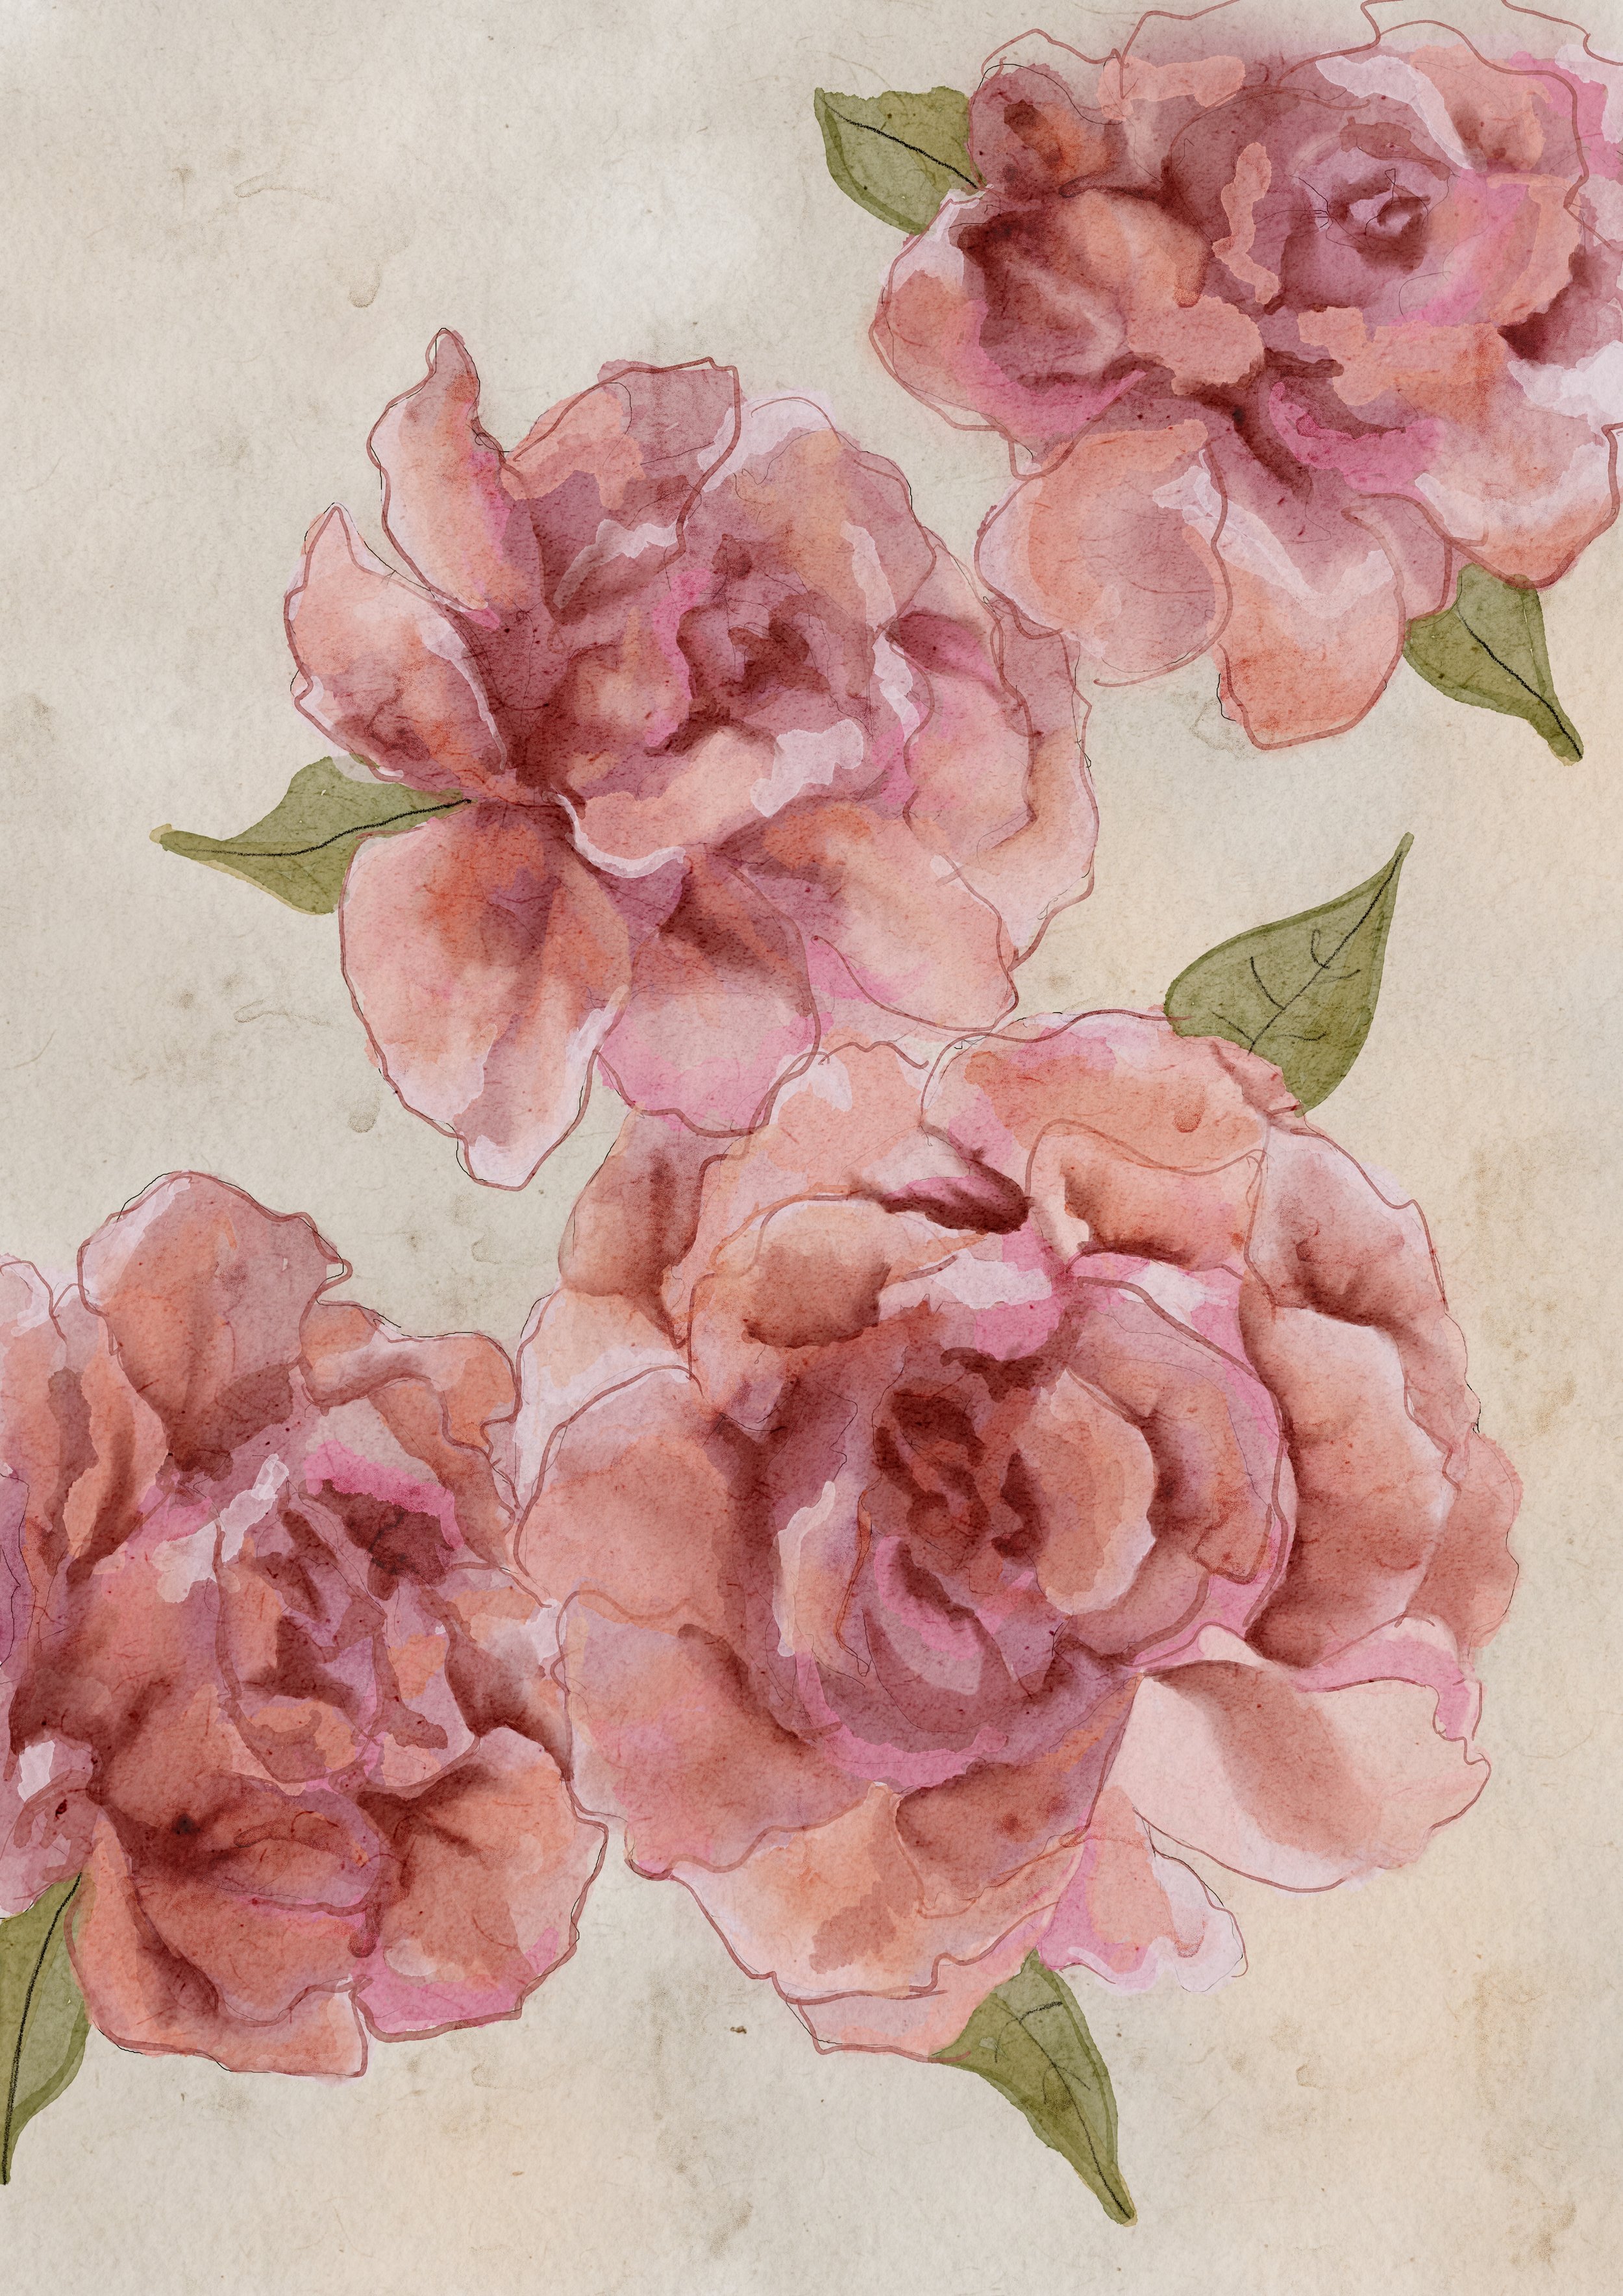 Digital Painting for garden roses by Nicola Robson of Dittany Entwined floral design